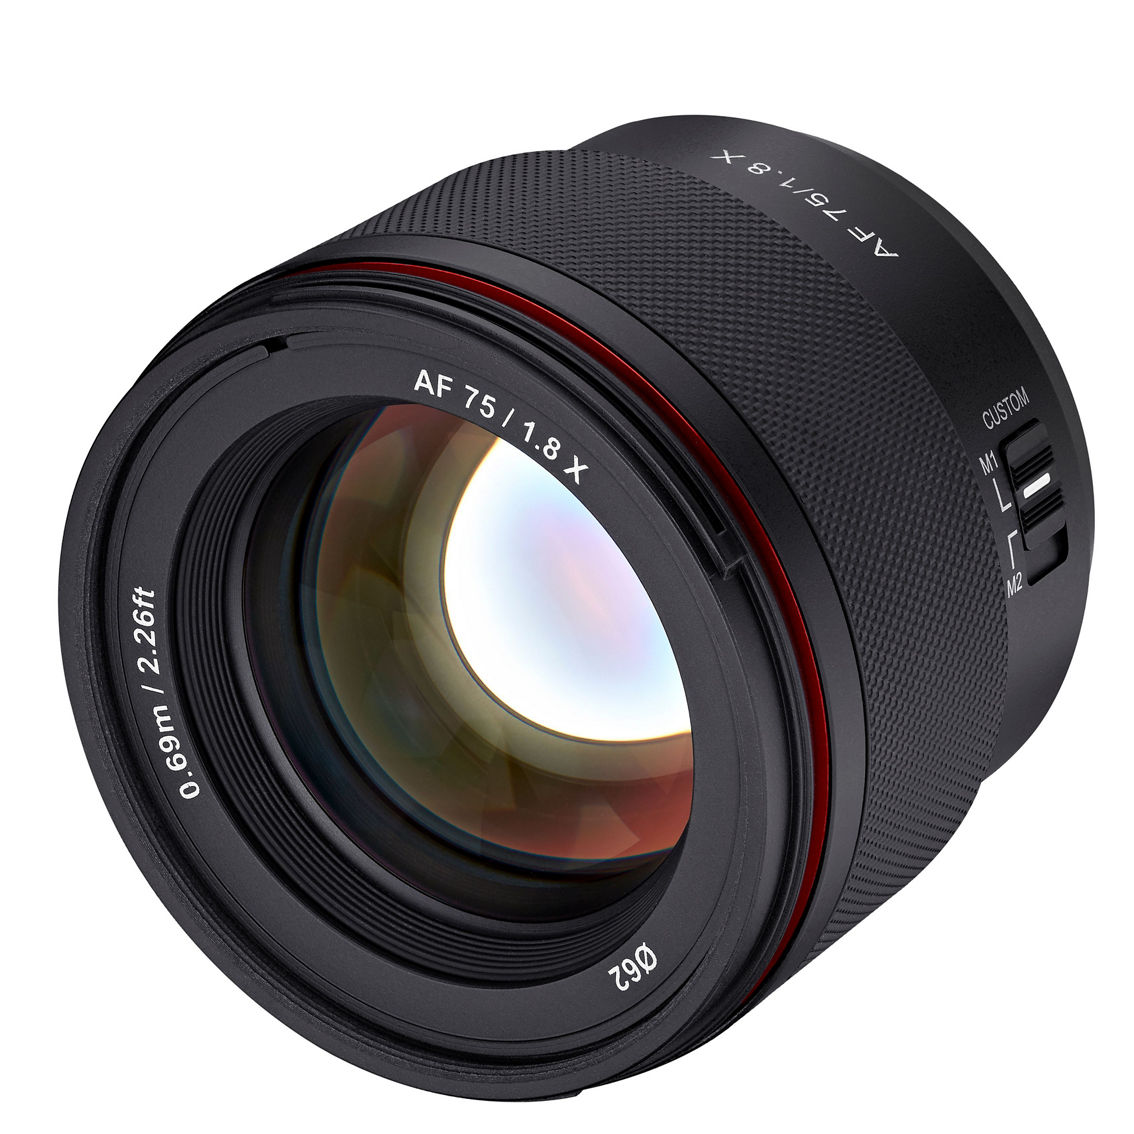 Rokinon 75mm F1.8 AF APS-C Compact Telephoto Lens for Fuji X - Image 4 of 5